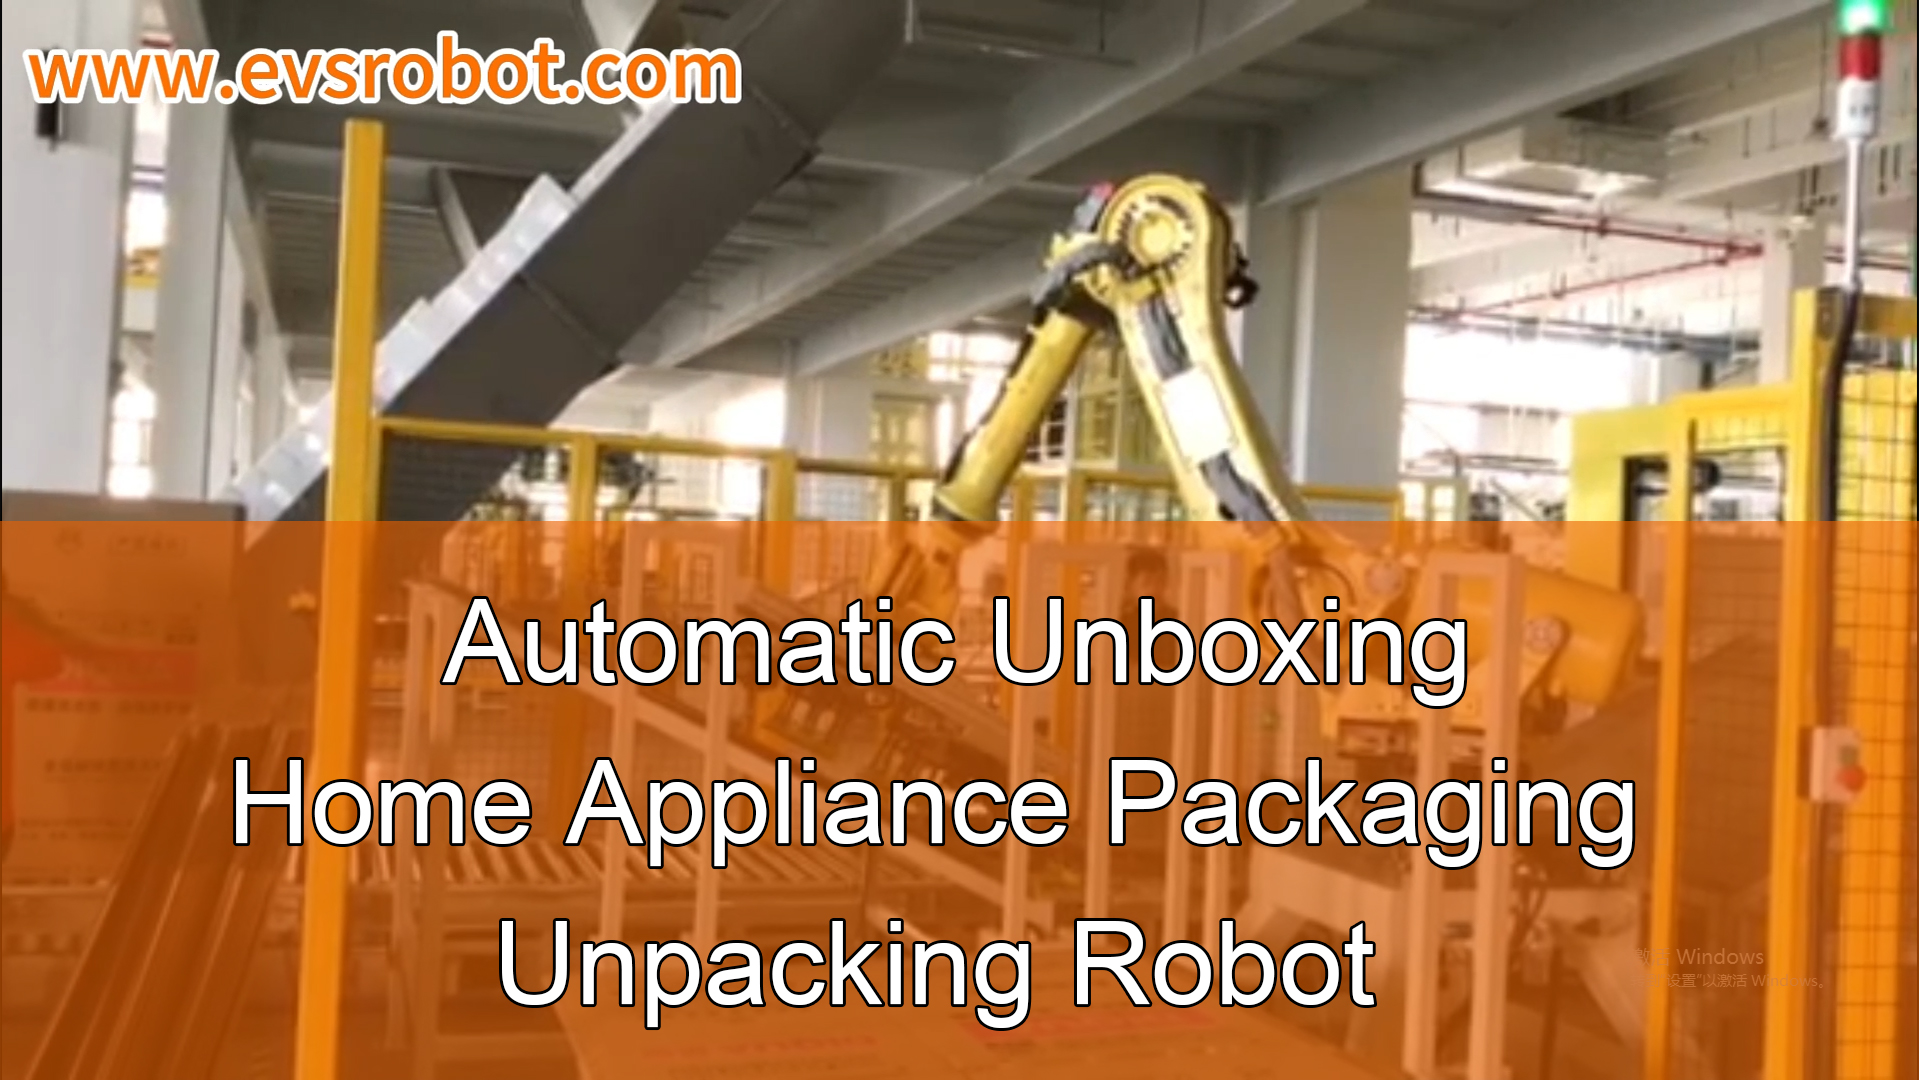 Automatic Unboxing | Unpacking Robot | Home Appliance Packaging